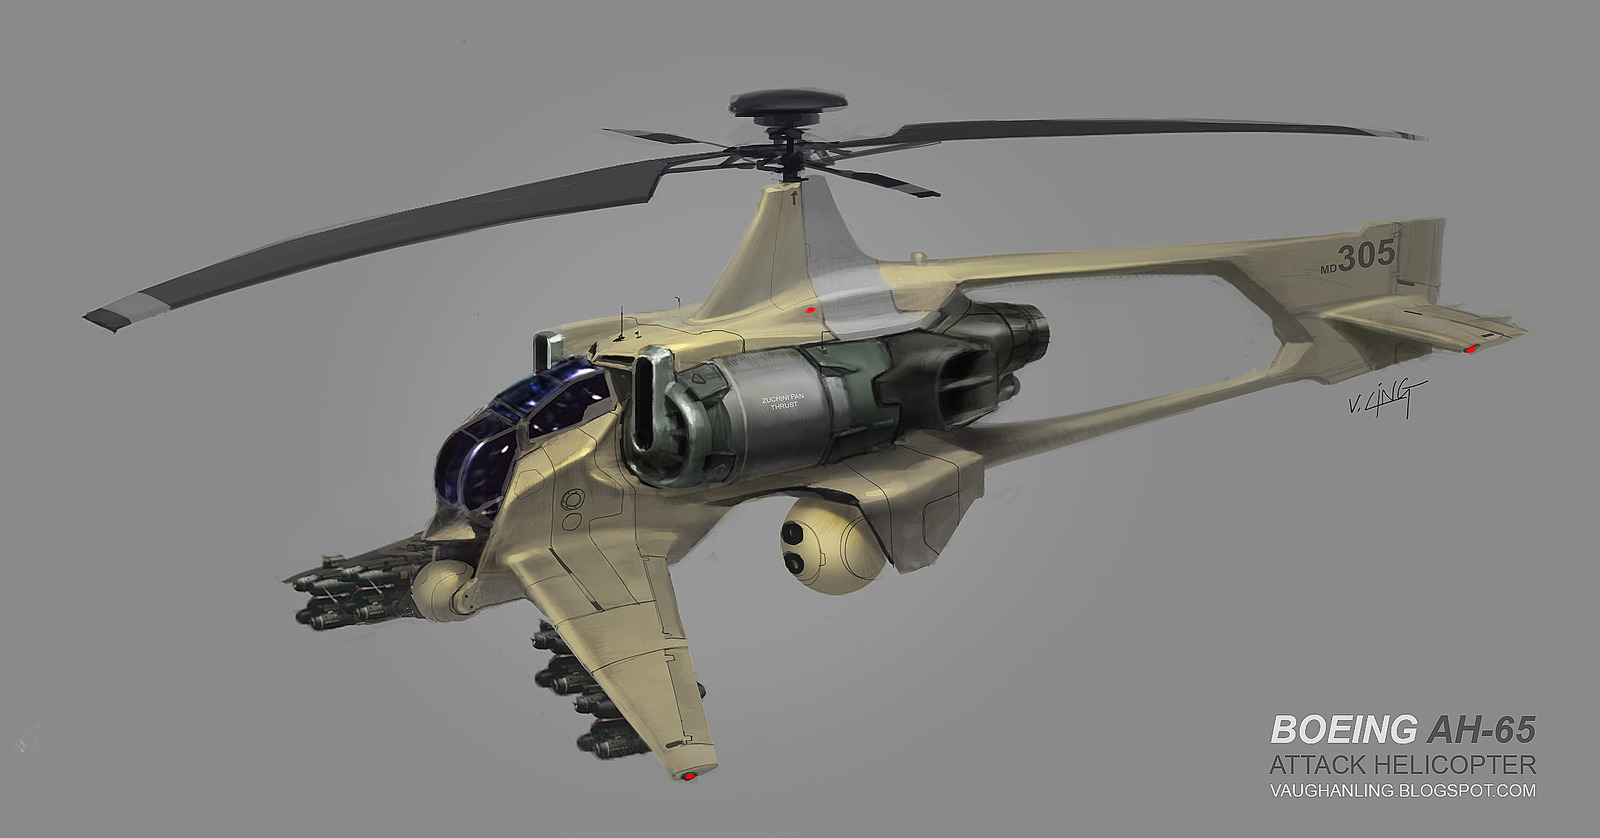 military, sci fi, aircraft, boeing, helicopter, vehicle